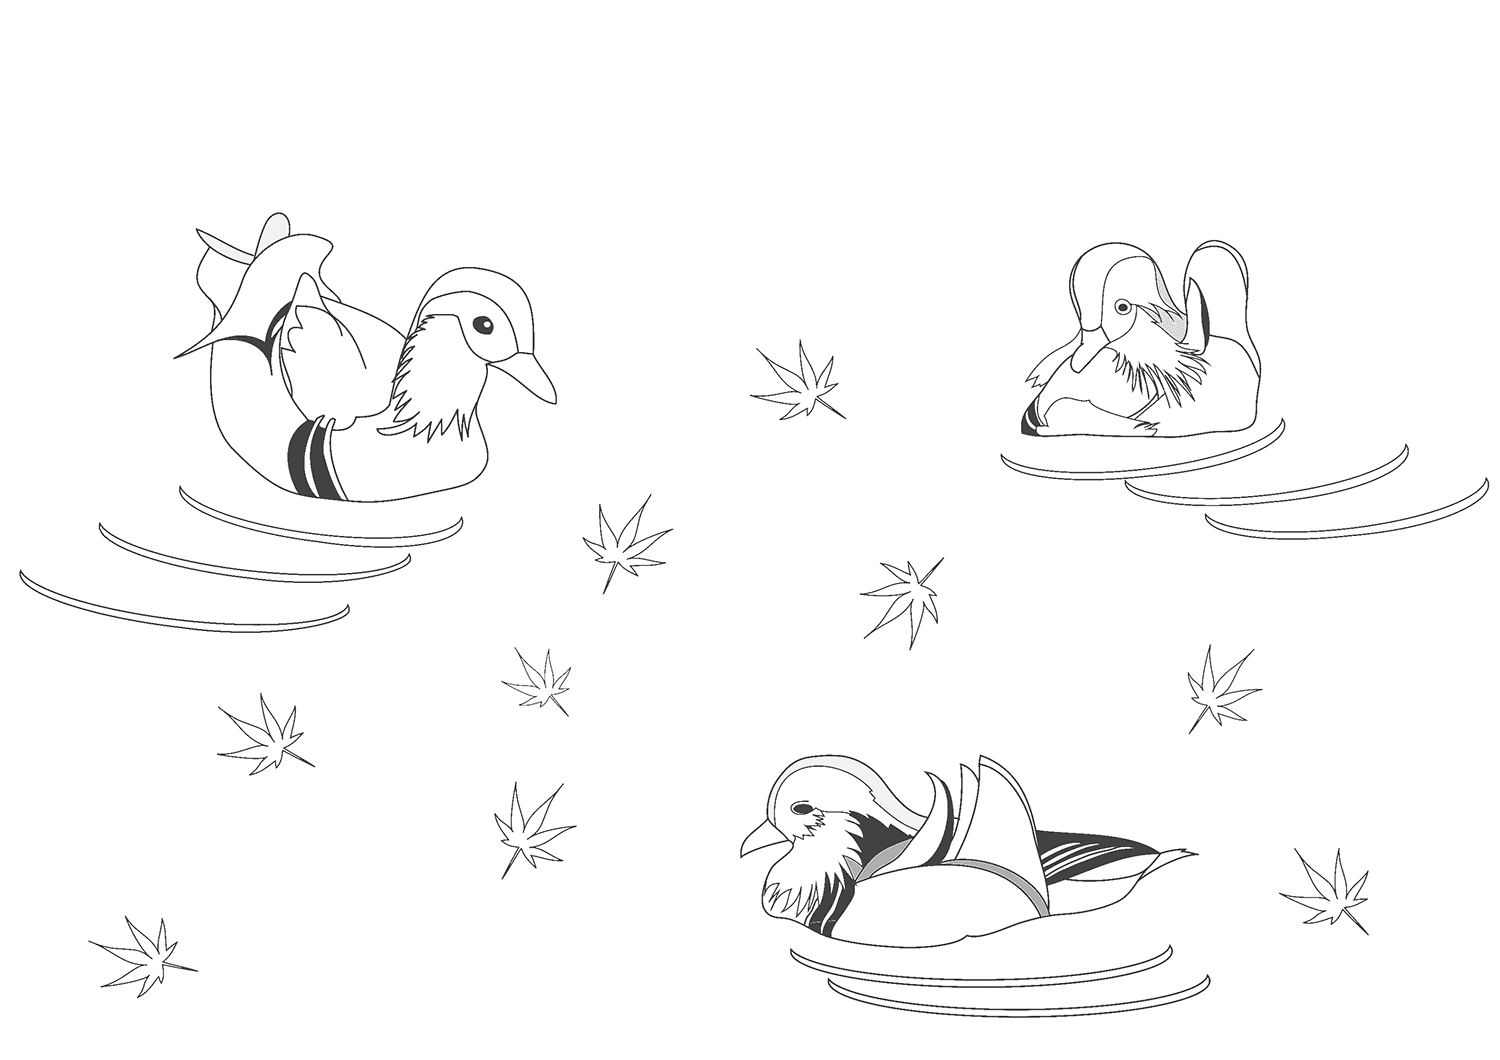 Male Mandarin ducks swimming in the maple leaves day Coloring Page